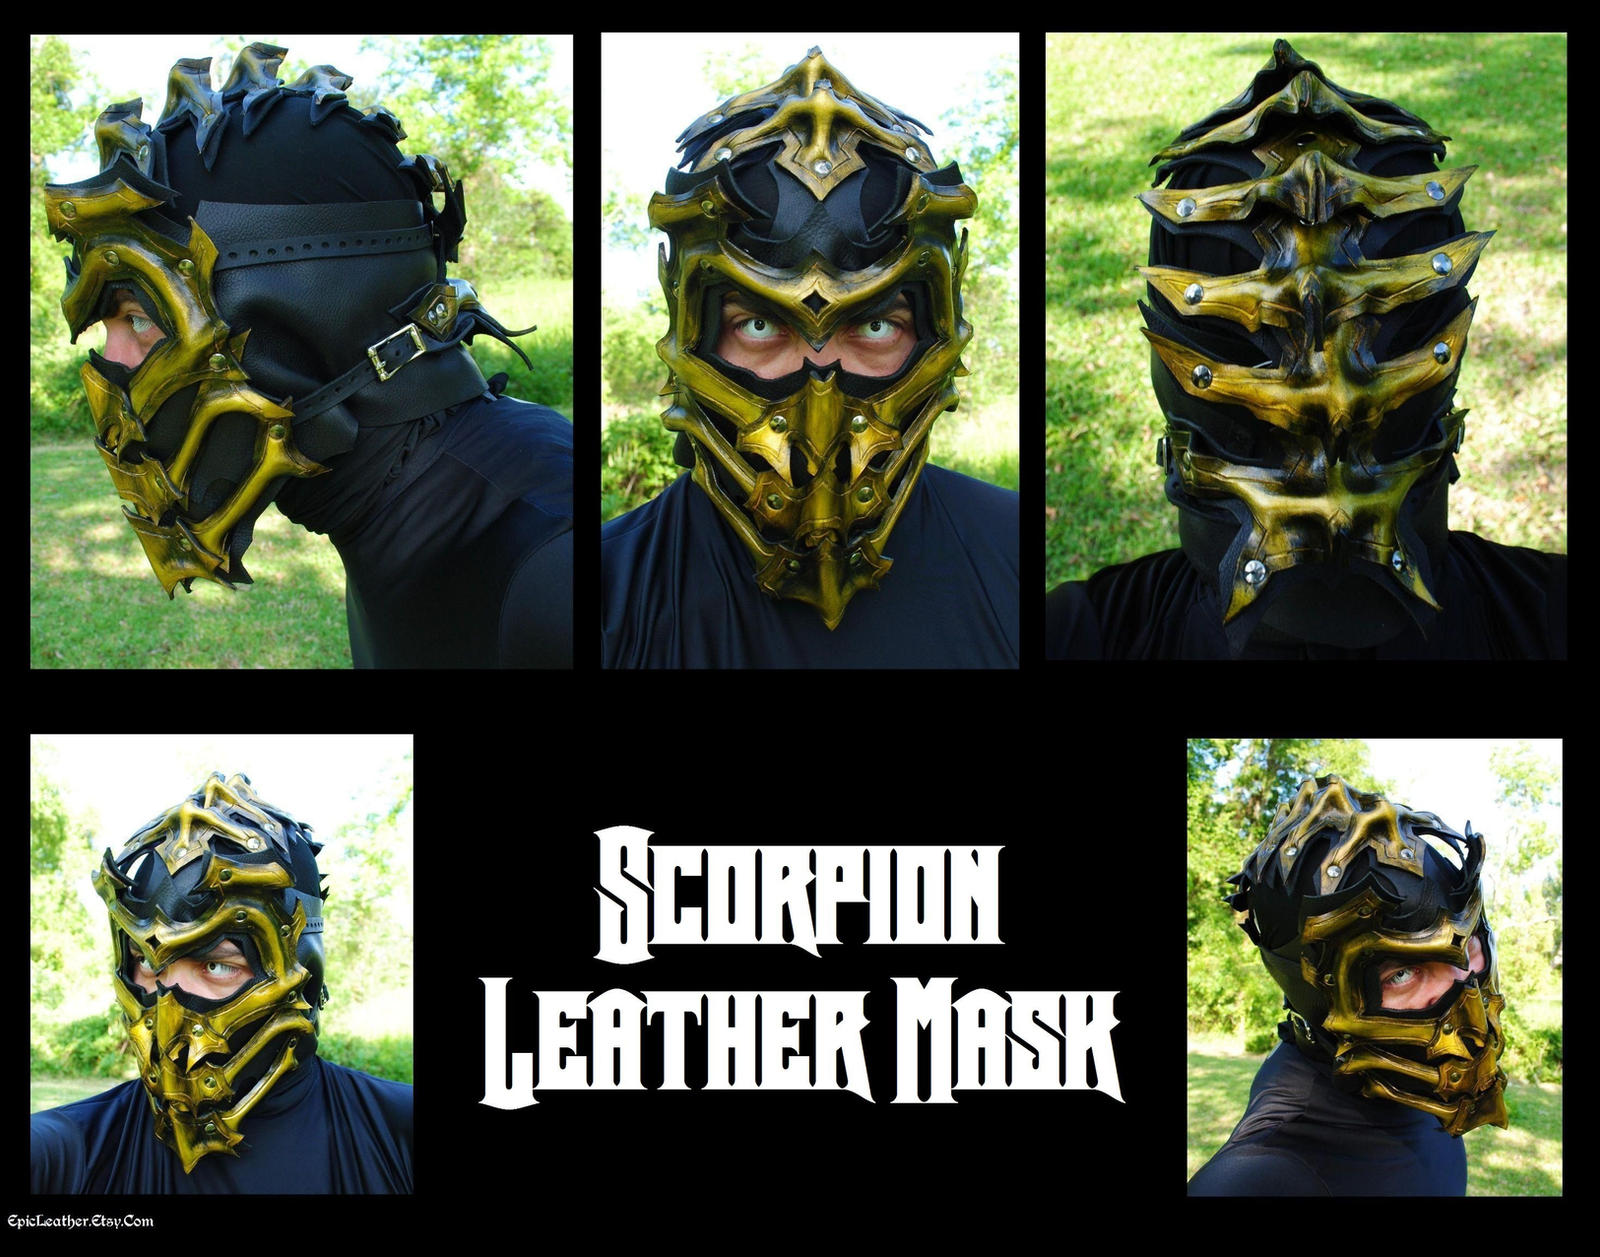 MK Scorpion Leather Mask by Epic-Leather on DeviantArt